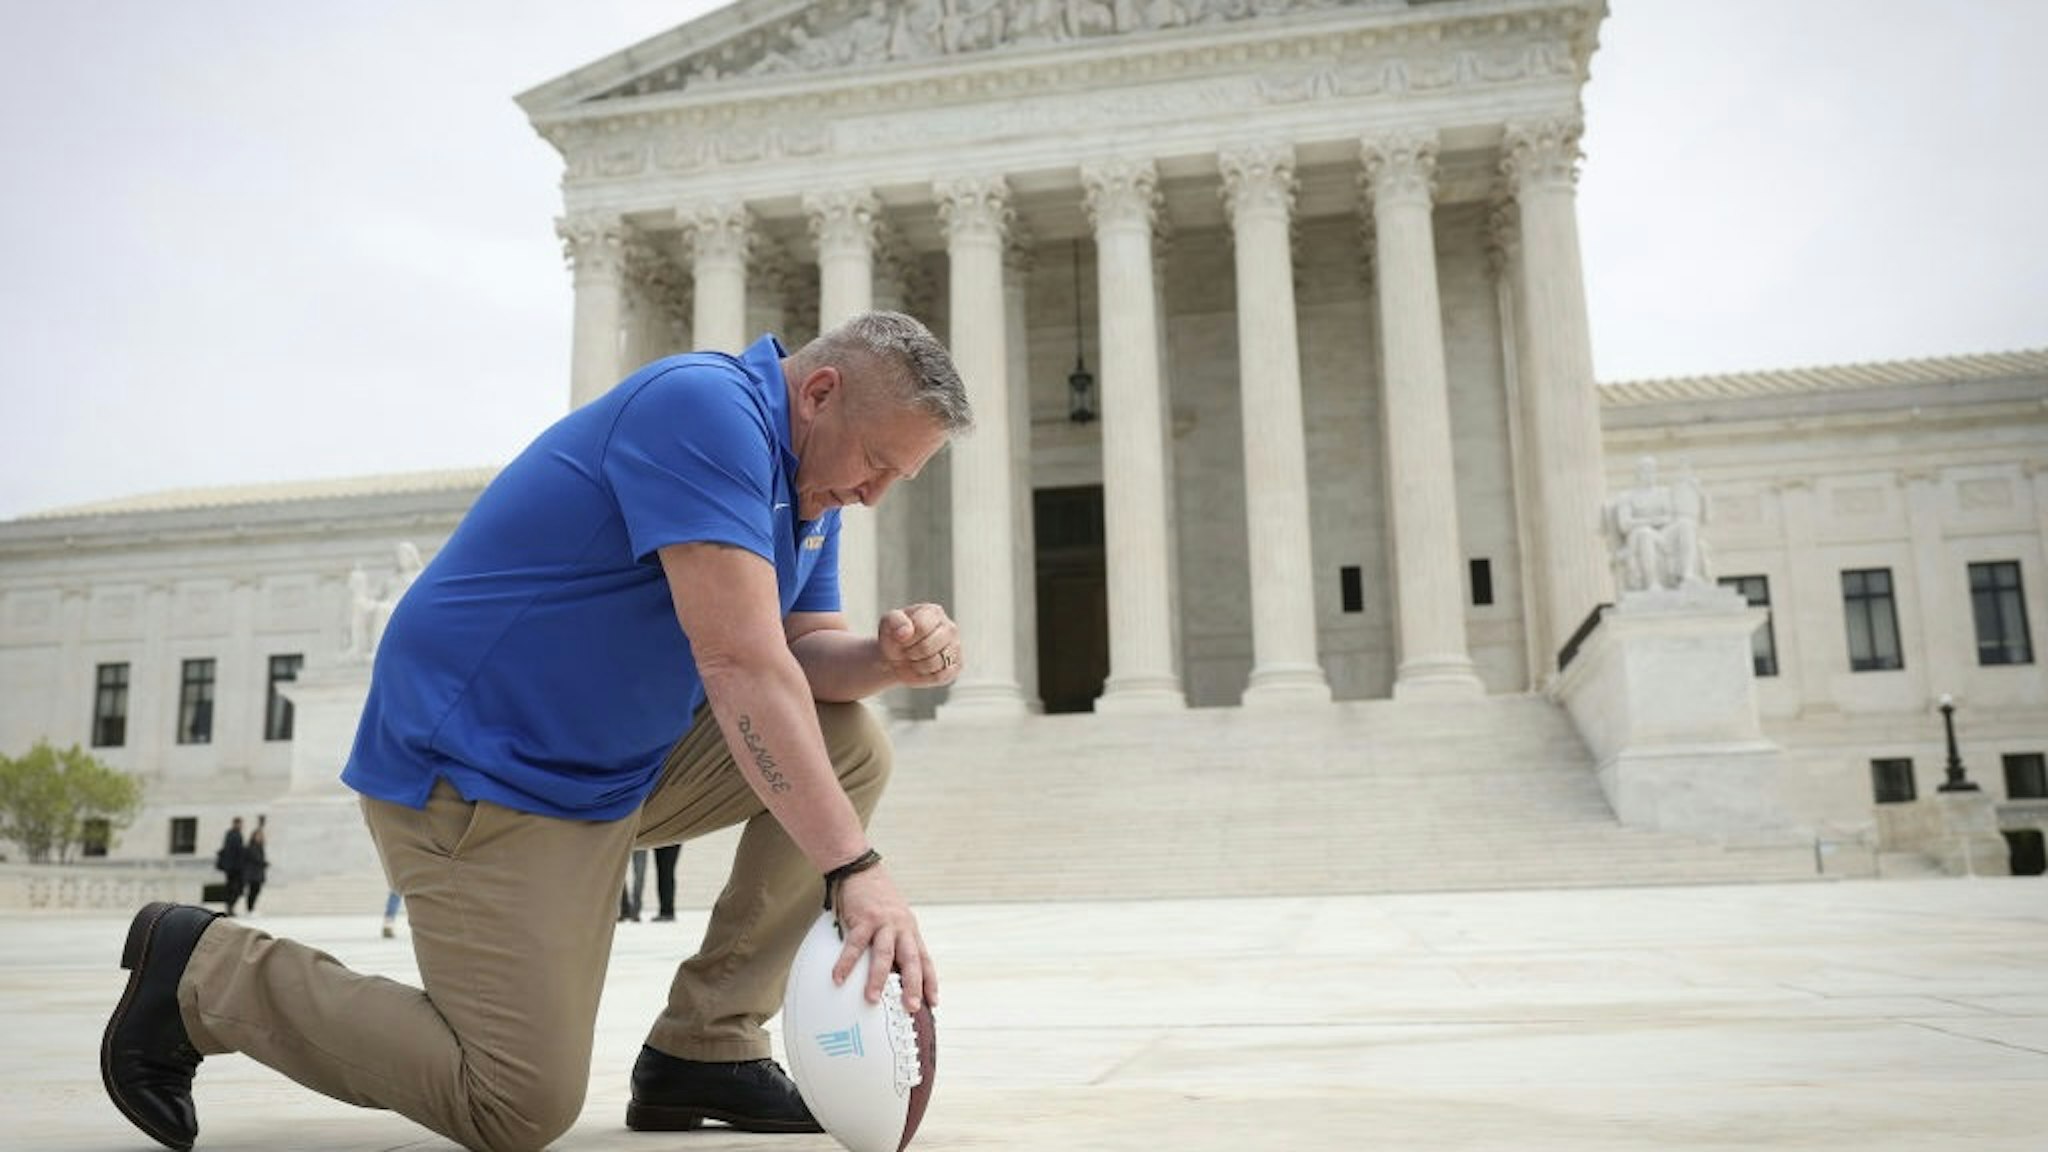 Christians Gather At Supreme Court To Pray As Bremerton Case Is Heard WASHINGTON, DC - APRIL 25: Former Bremerton High School assistant football coach Joe Kennedy takes a knee in front of the U.S. Supreme Court after his legal case, Kennedy vs. Bremerton School District, was argued before the court on April 25, 2022 in Washington, DC. Kennedy was terminated from his job by Bremerton public school officials in 2015 after refusing to stop his on-field prayers after football games. (Photo by Win McNamee/Getty Images) Win McNamee / Staff